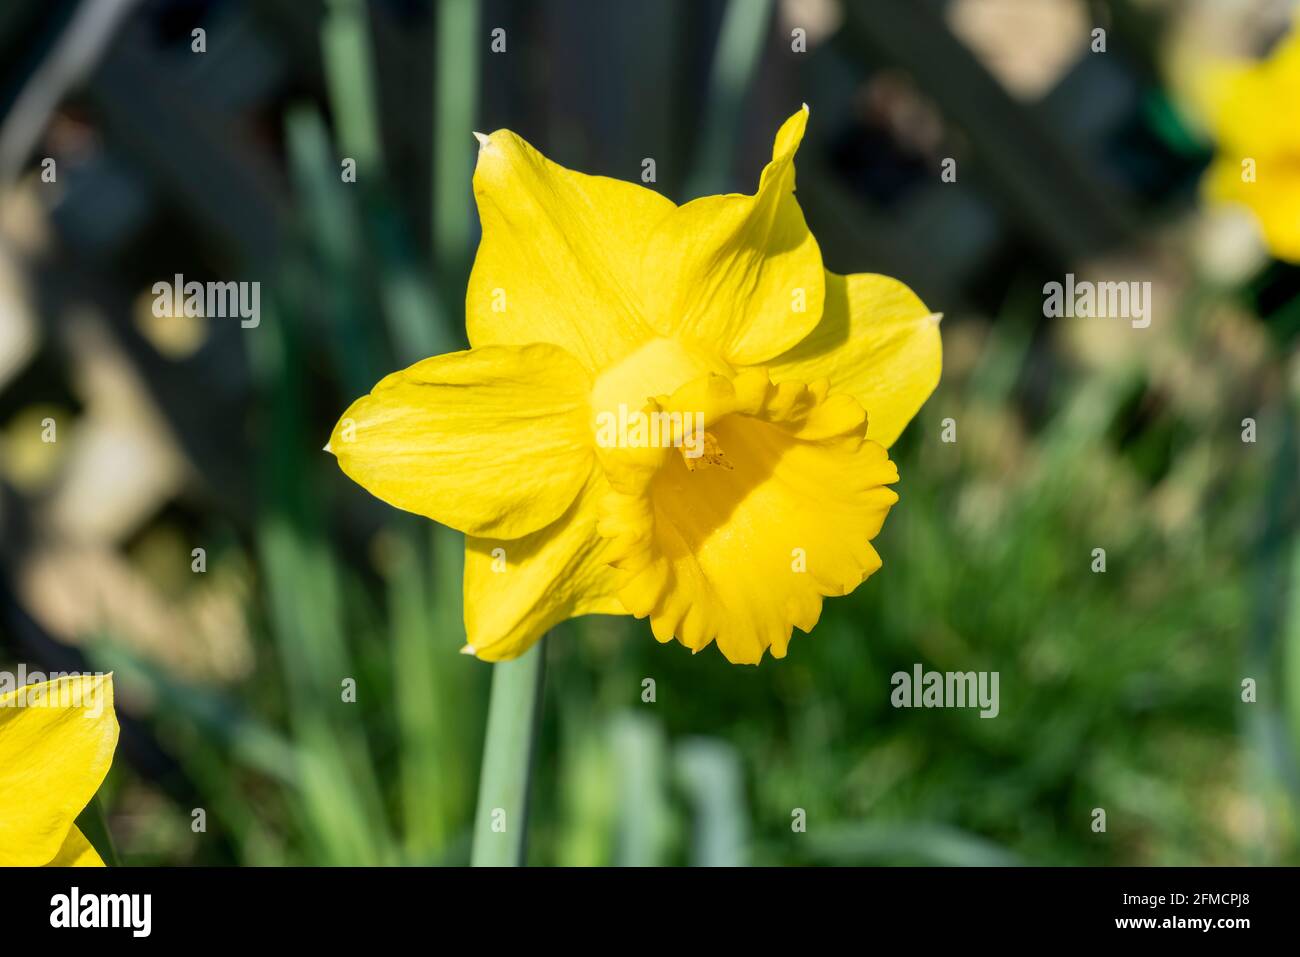 Daffodil (Narcissus) a yellow spring flower bulbous plant during the springtime flowering season of March, stock photo image Stock Photo